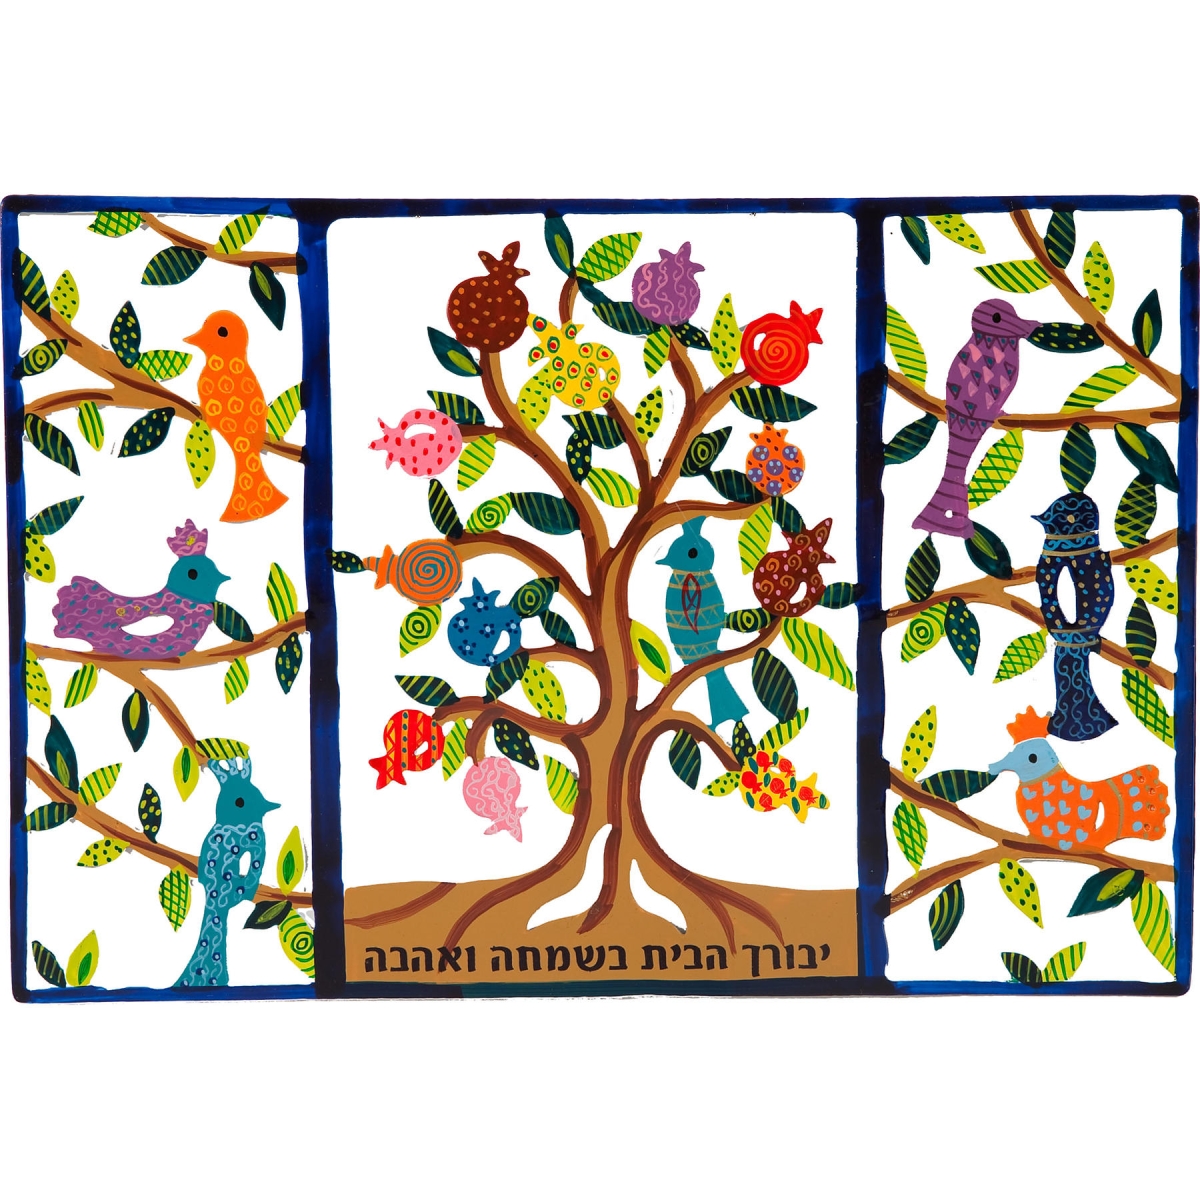 Yair Emanuel Laser Cut Hand Painted Triptych House Blessing Wall Art - Birds in the Window  - 1